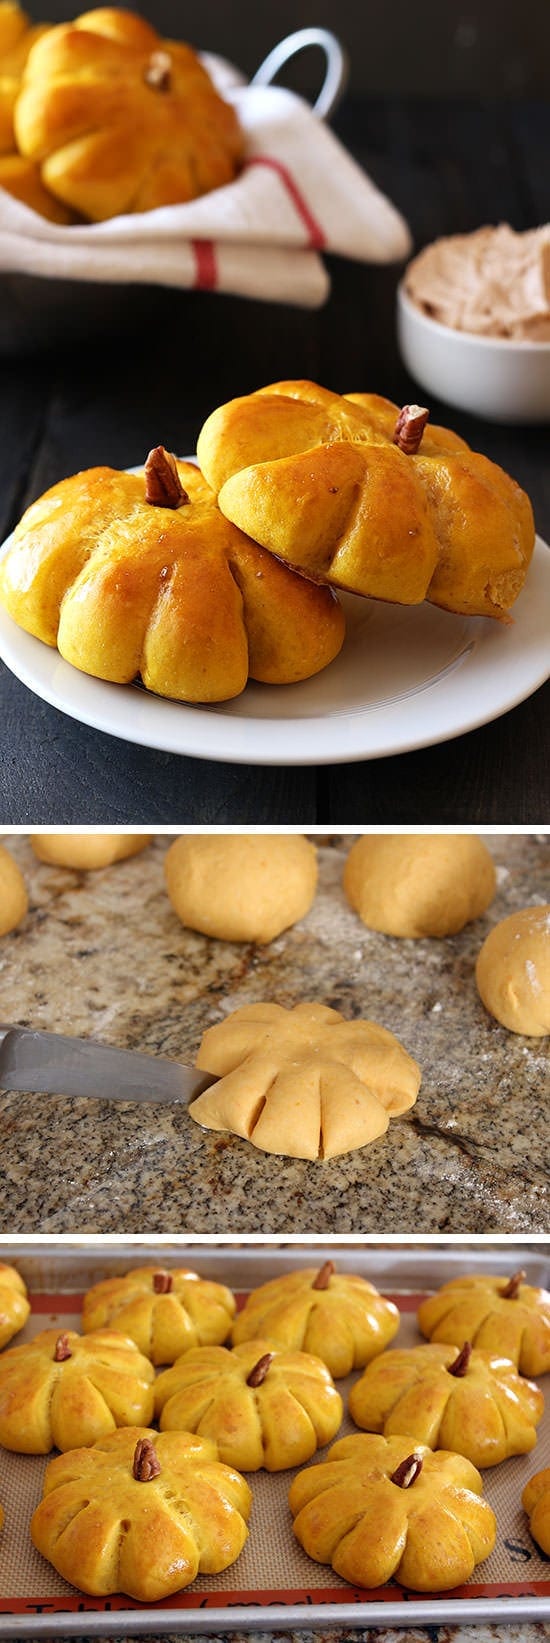 Pumpkin Bread Rolls with Cinnamon Butter - EVERYONE loves these!